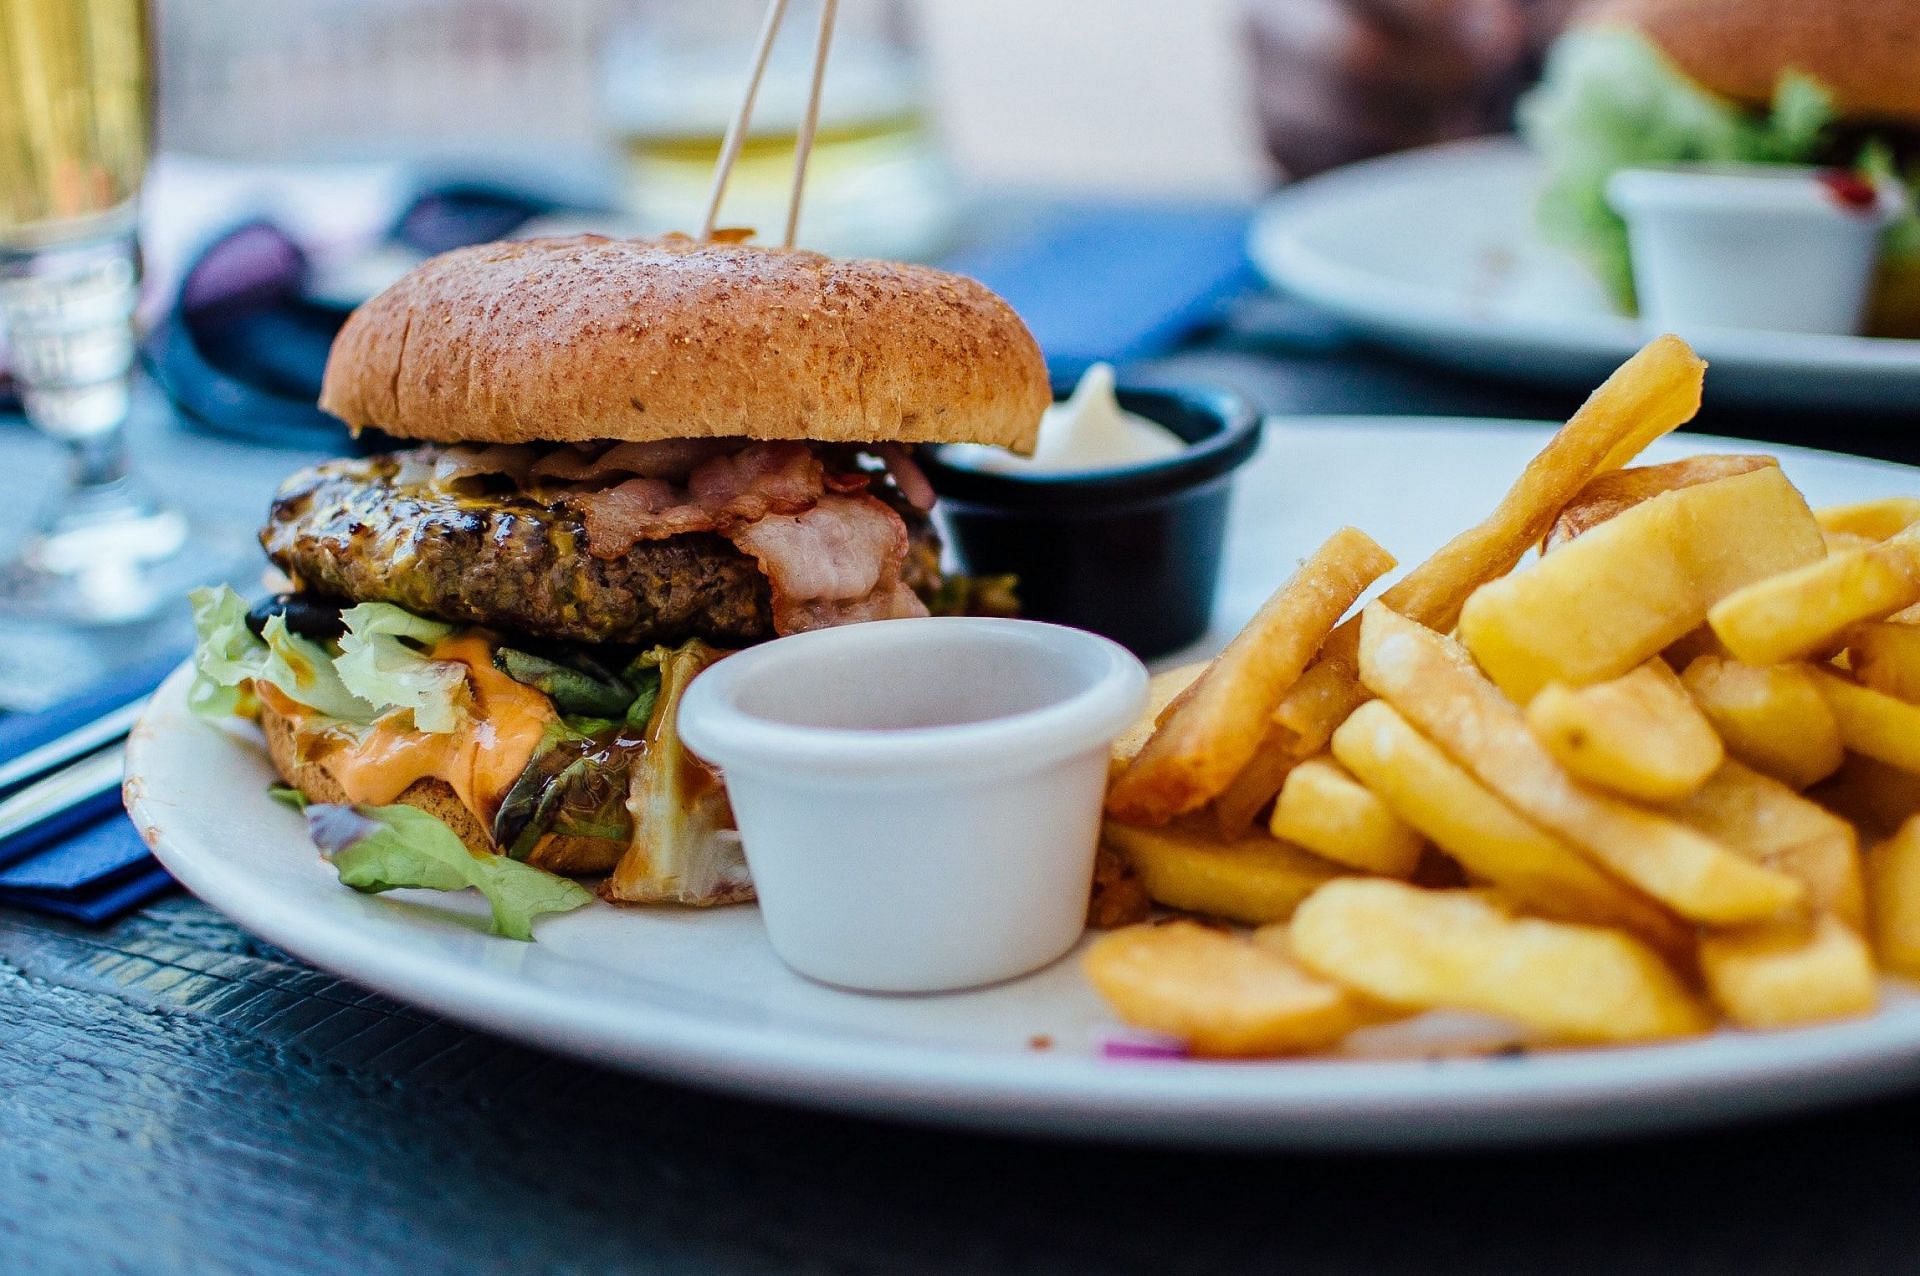 Processed food increases the chances of heart diseases. (Image via Pexels / Robin Stickel)